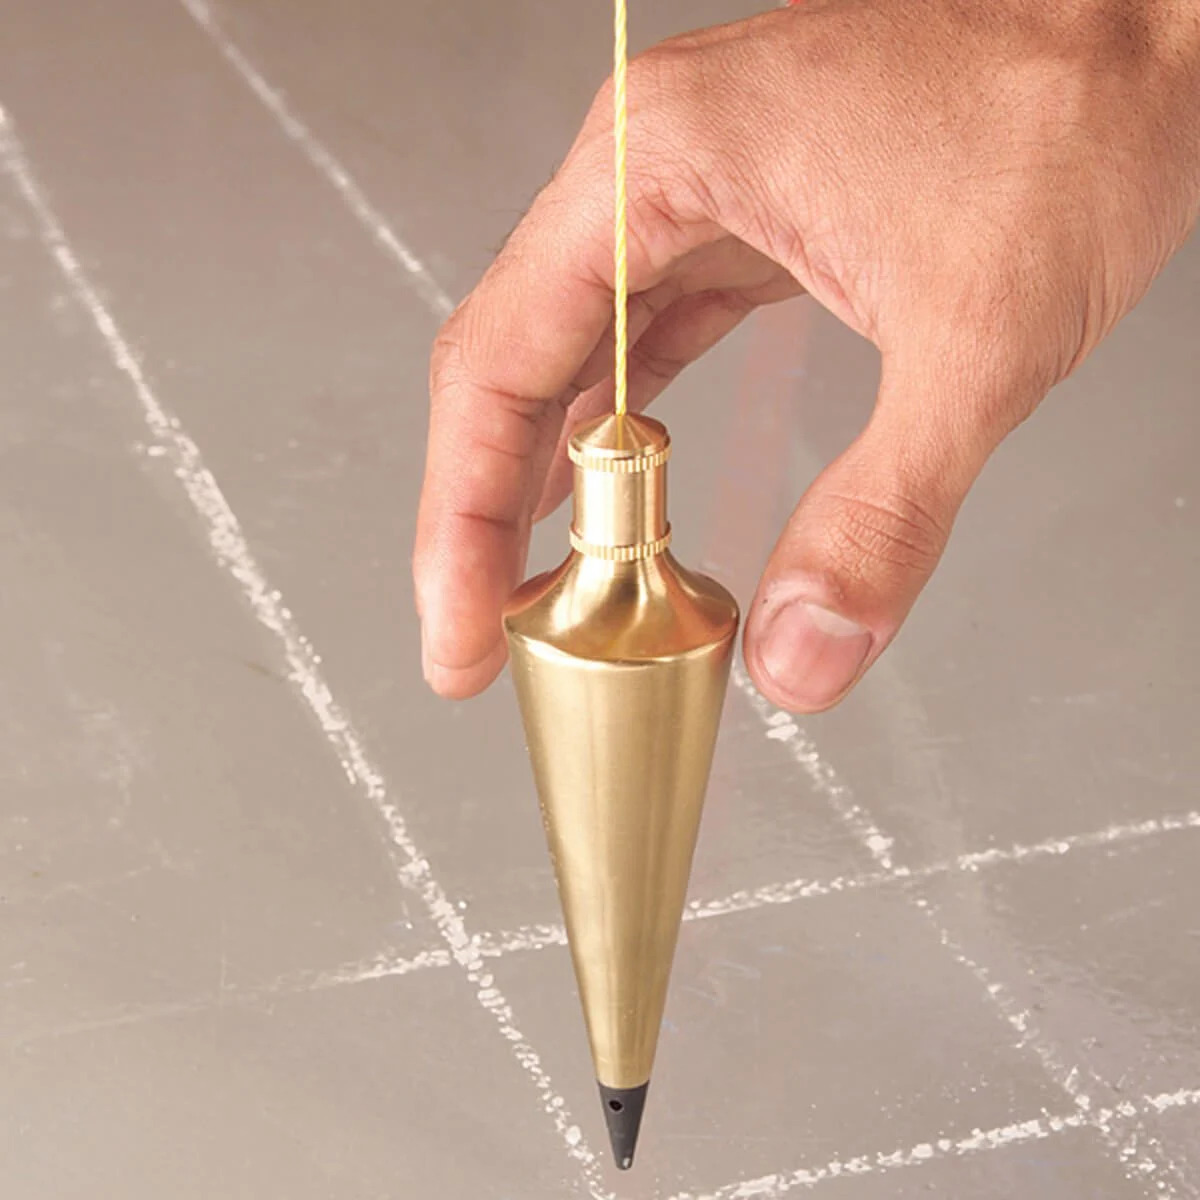 What Is A Plumb Bob Used For In Surveying